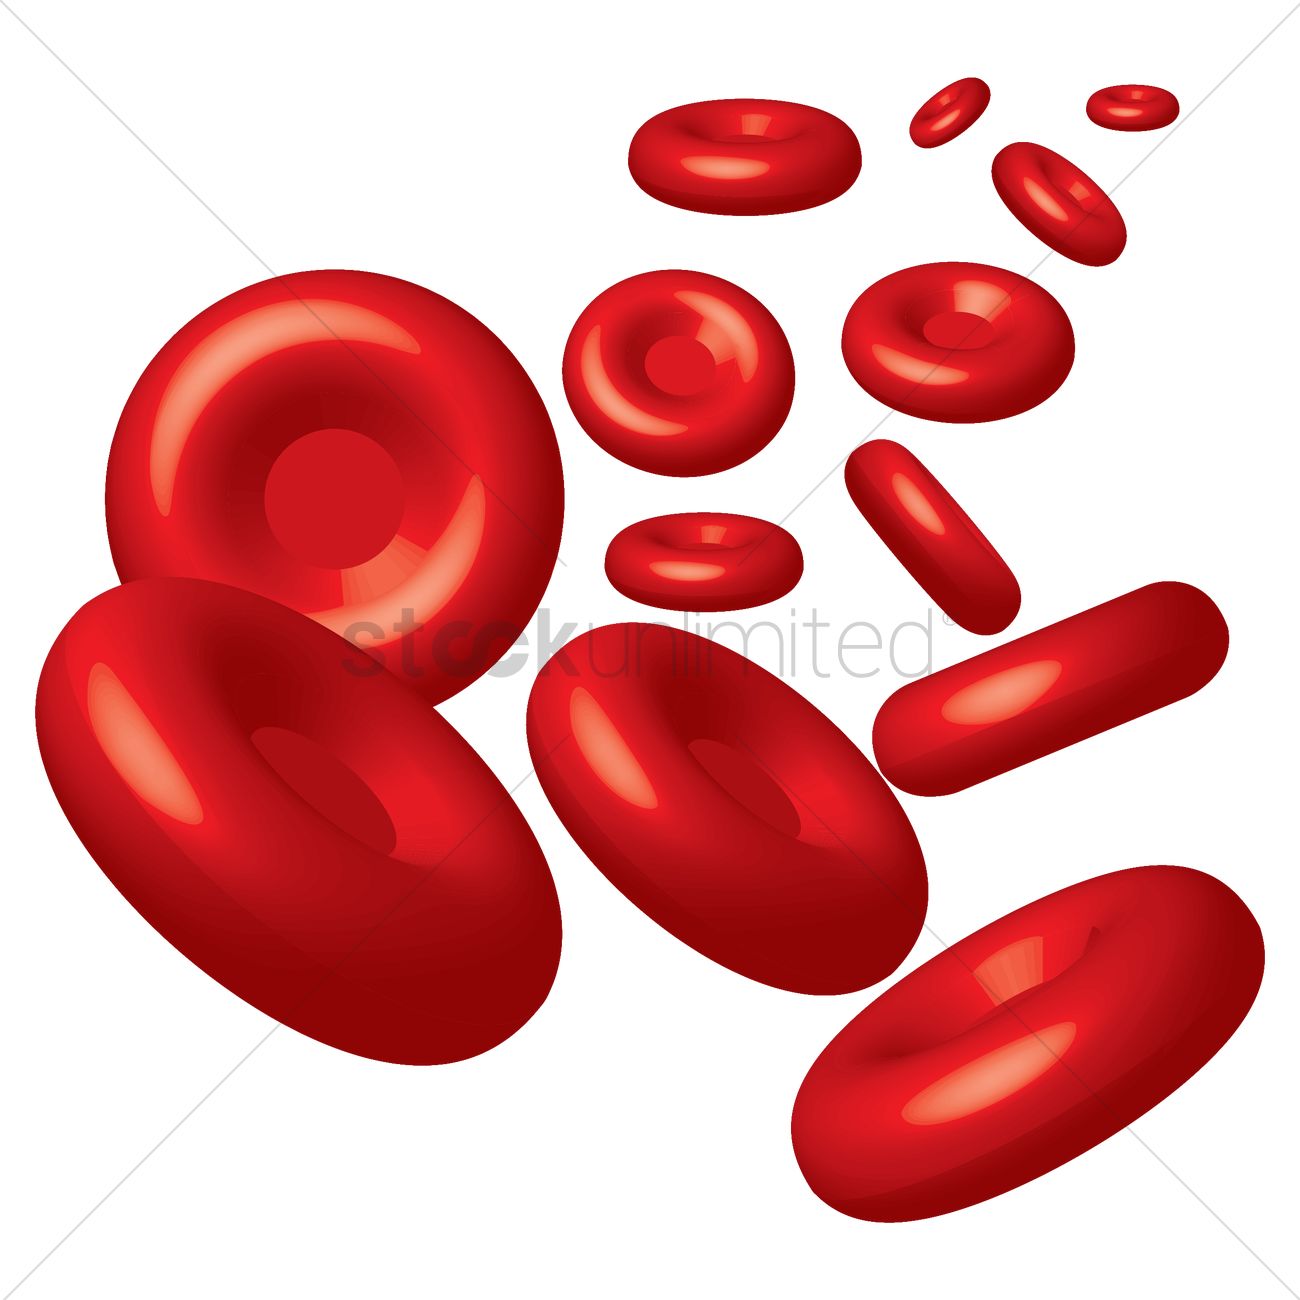 Red Blood Cell Png - Red Blood Cells Vector Graphic, Transparent background PNG HD thumbnail